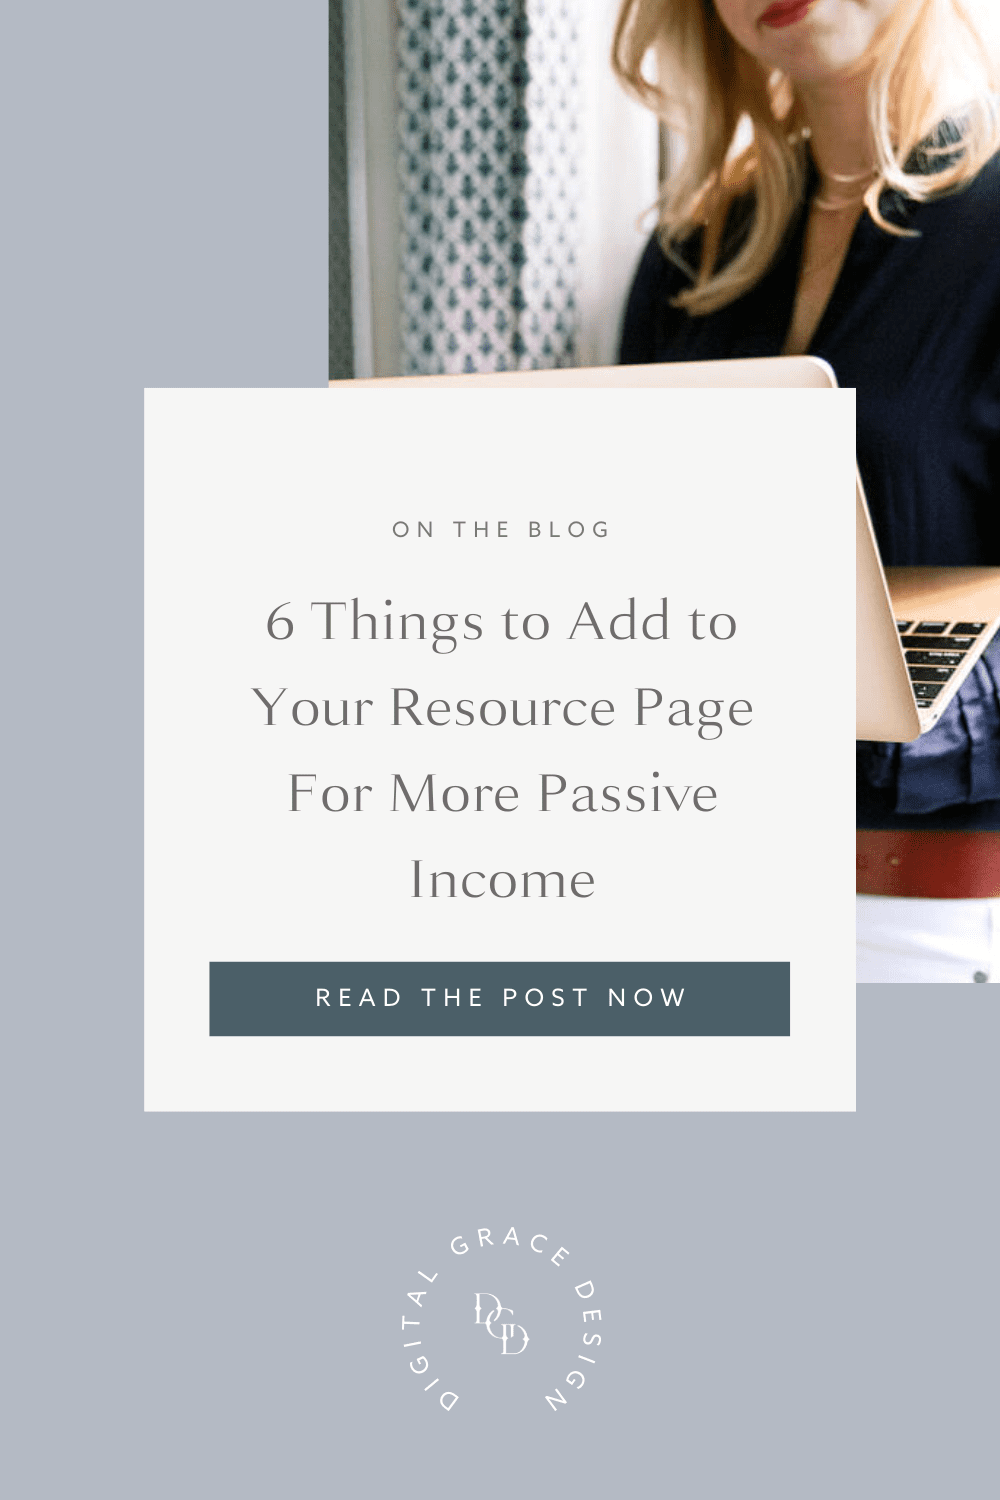 6 Things to Add to Your Resource Page For More Passive Income